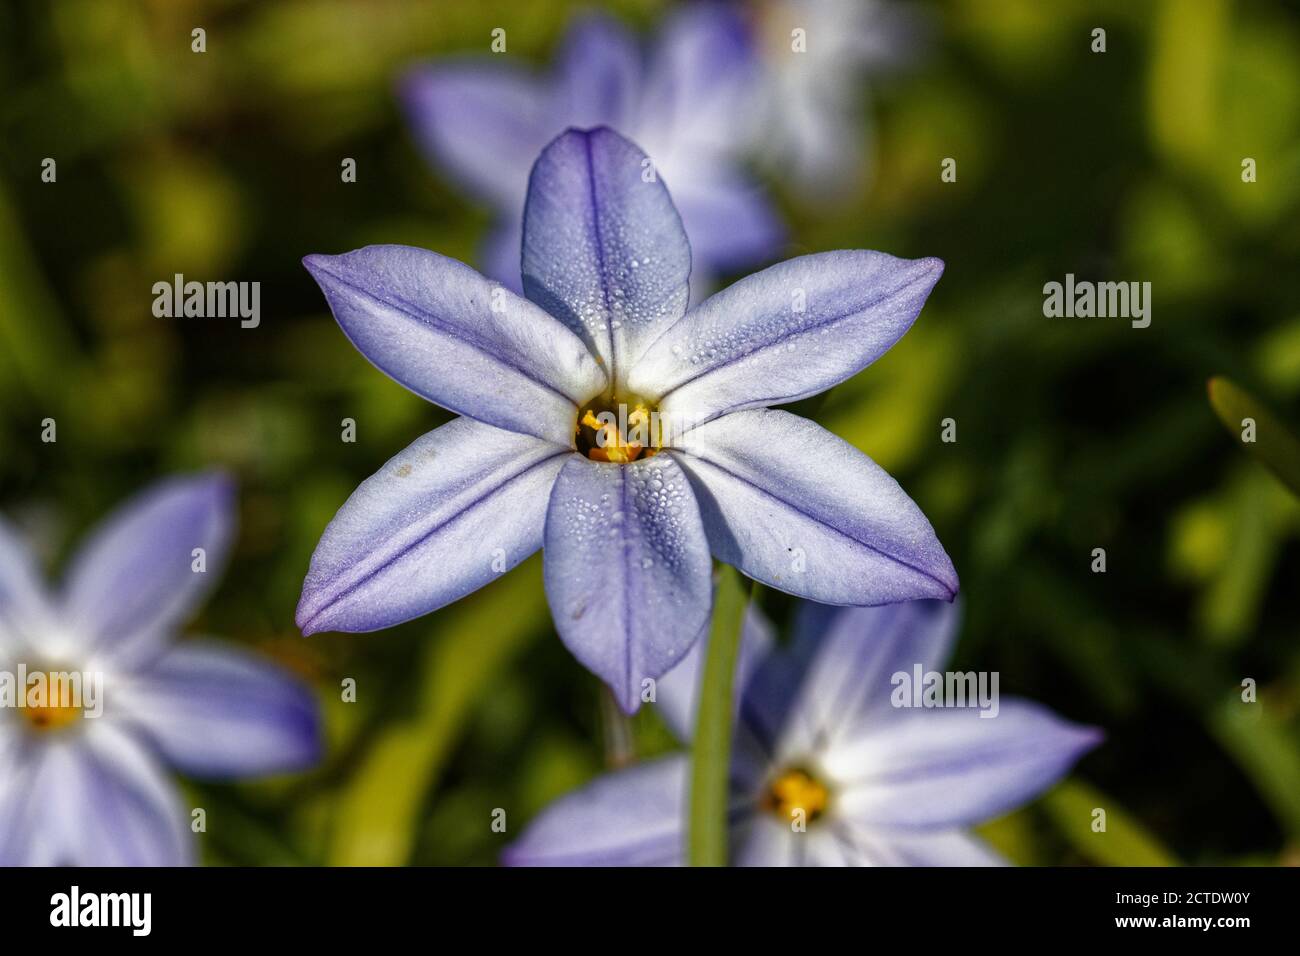 Ipheion uniflorum is a species of flowering plant, related to the onions, so is placed in the allium subfamily (Allioideae) of the Amaryllidaceae. Stock Photo